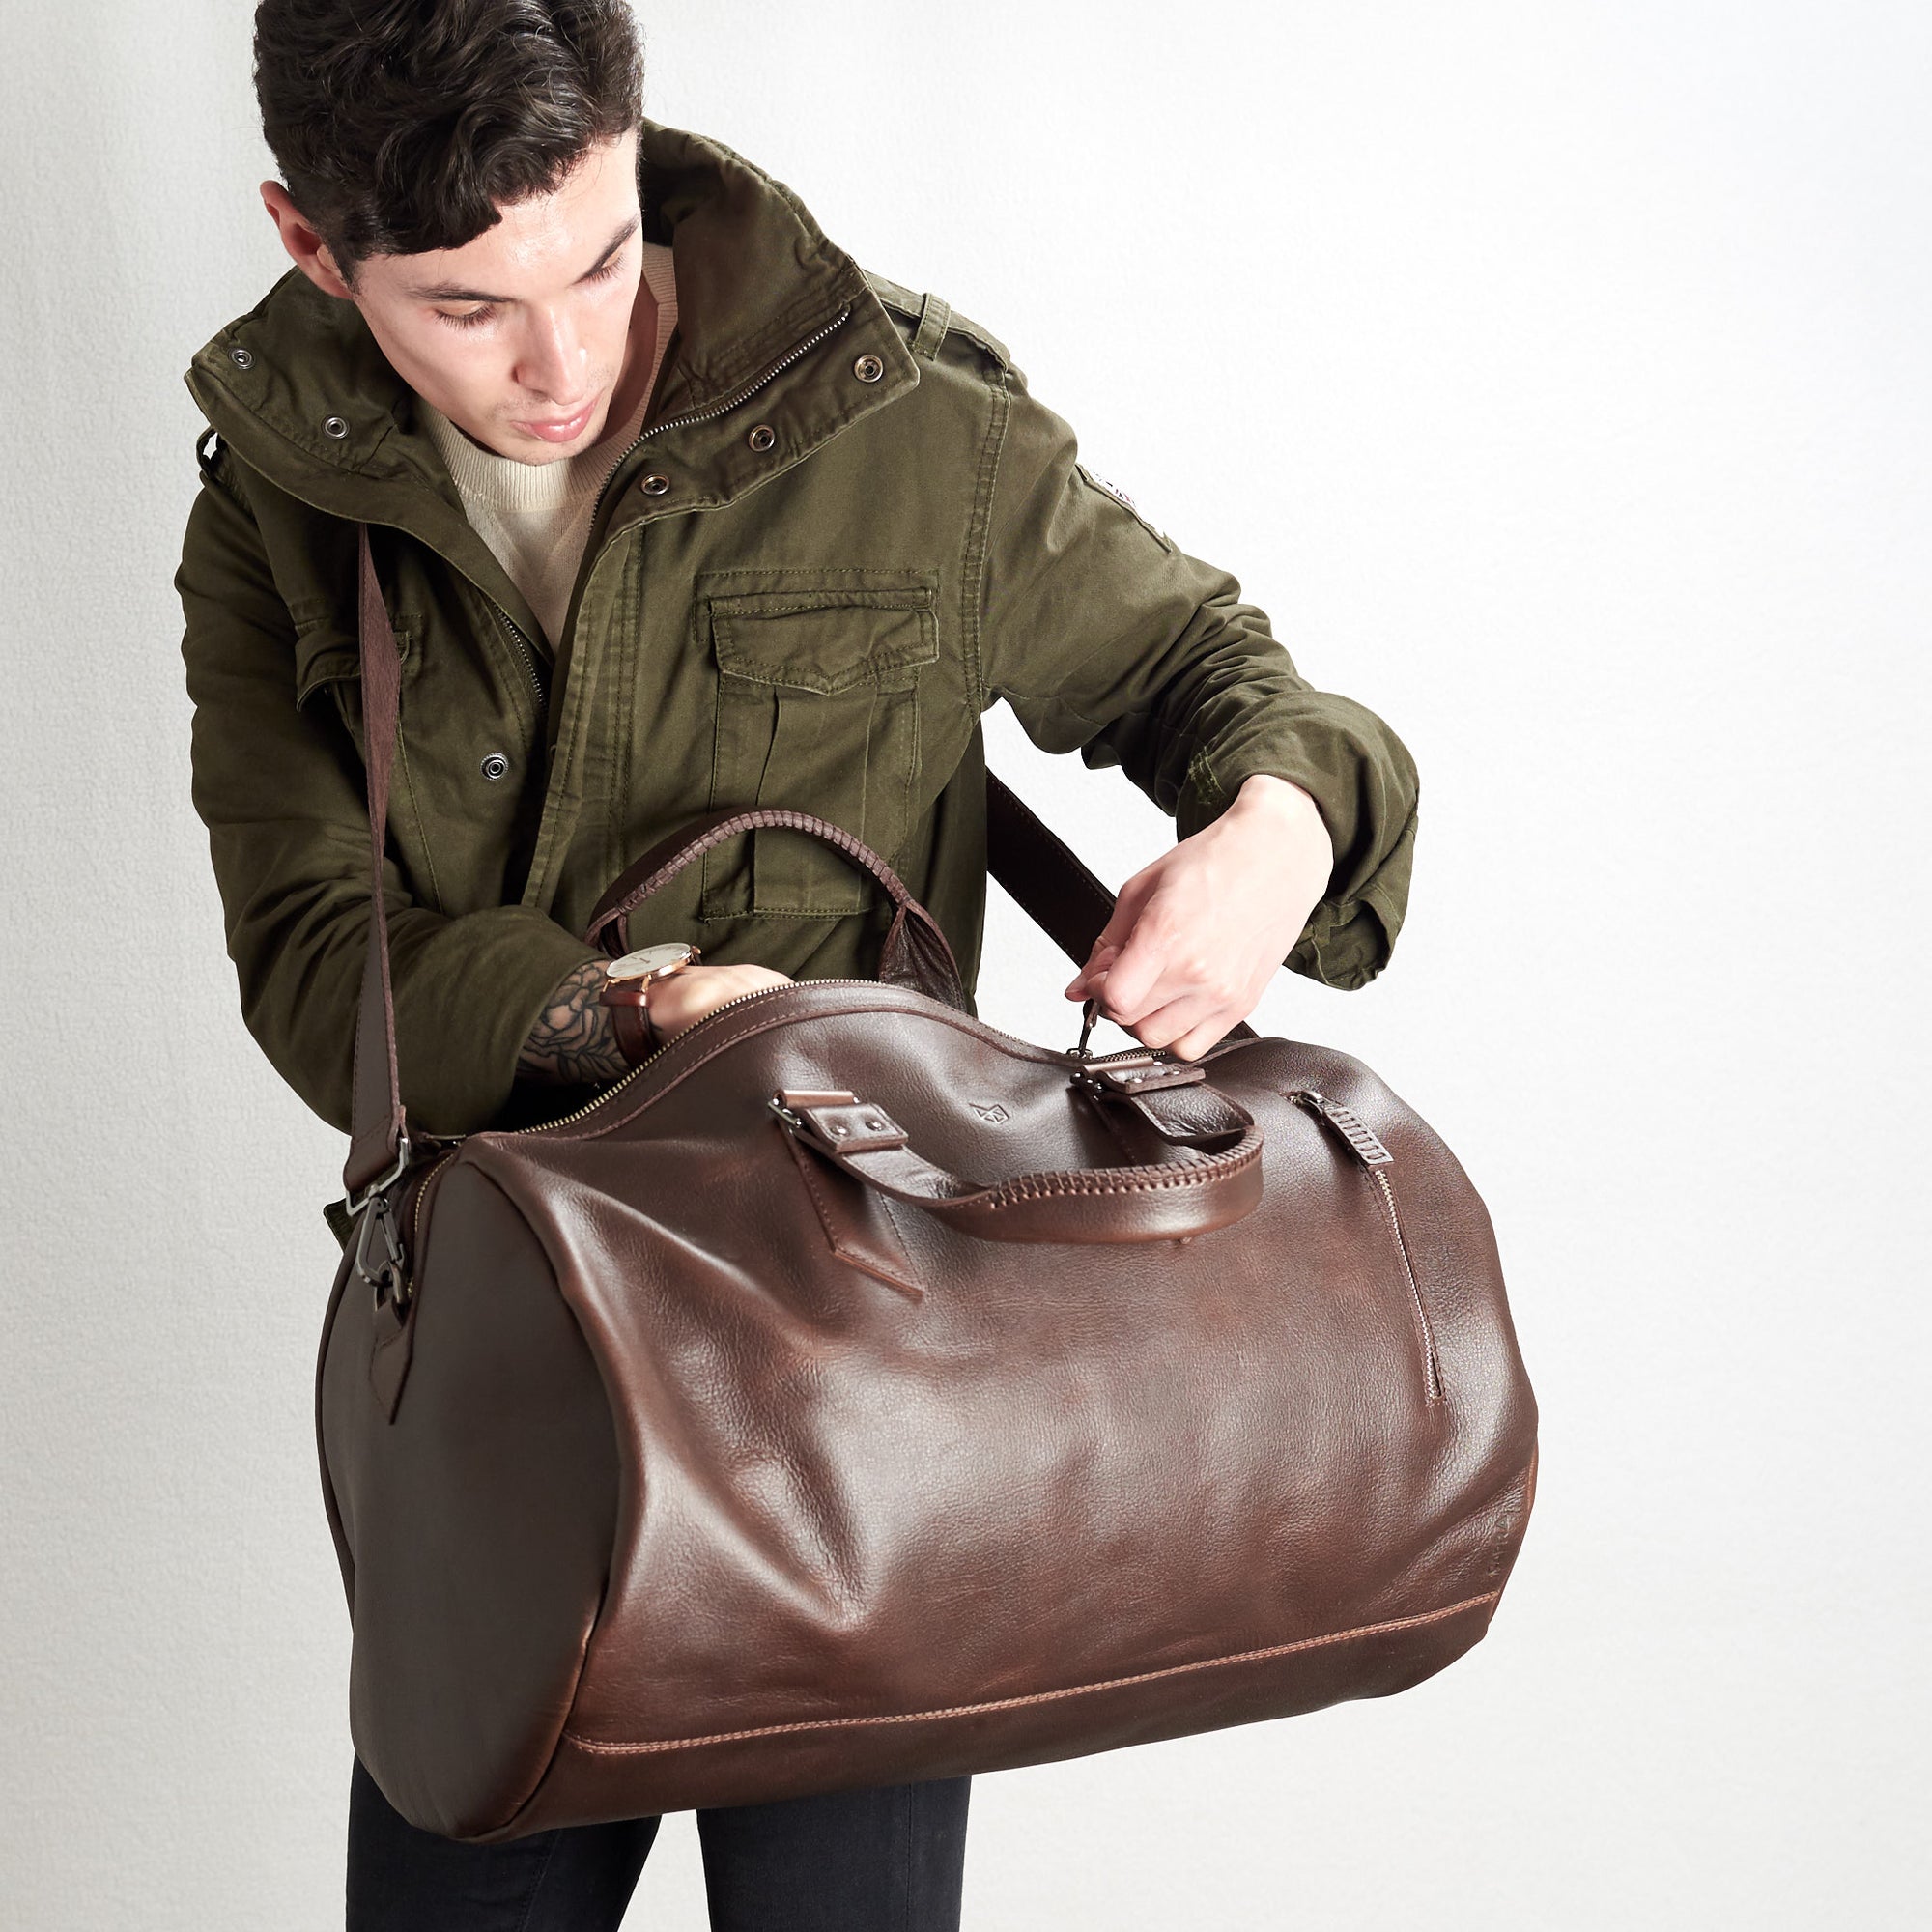 Substantial dark brown duffle bag by Capra Leather. Style inside picture.